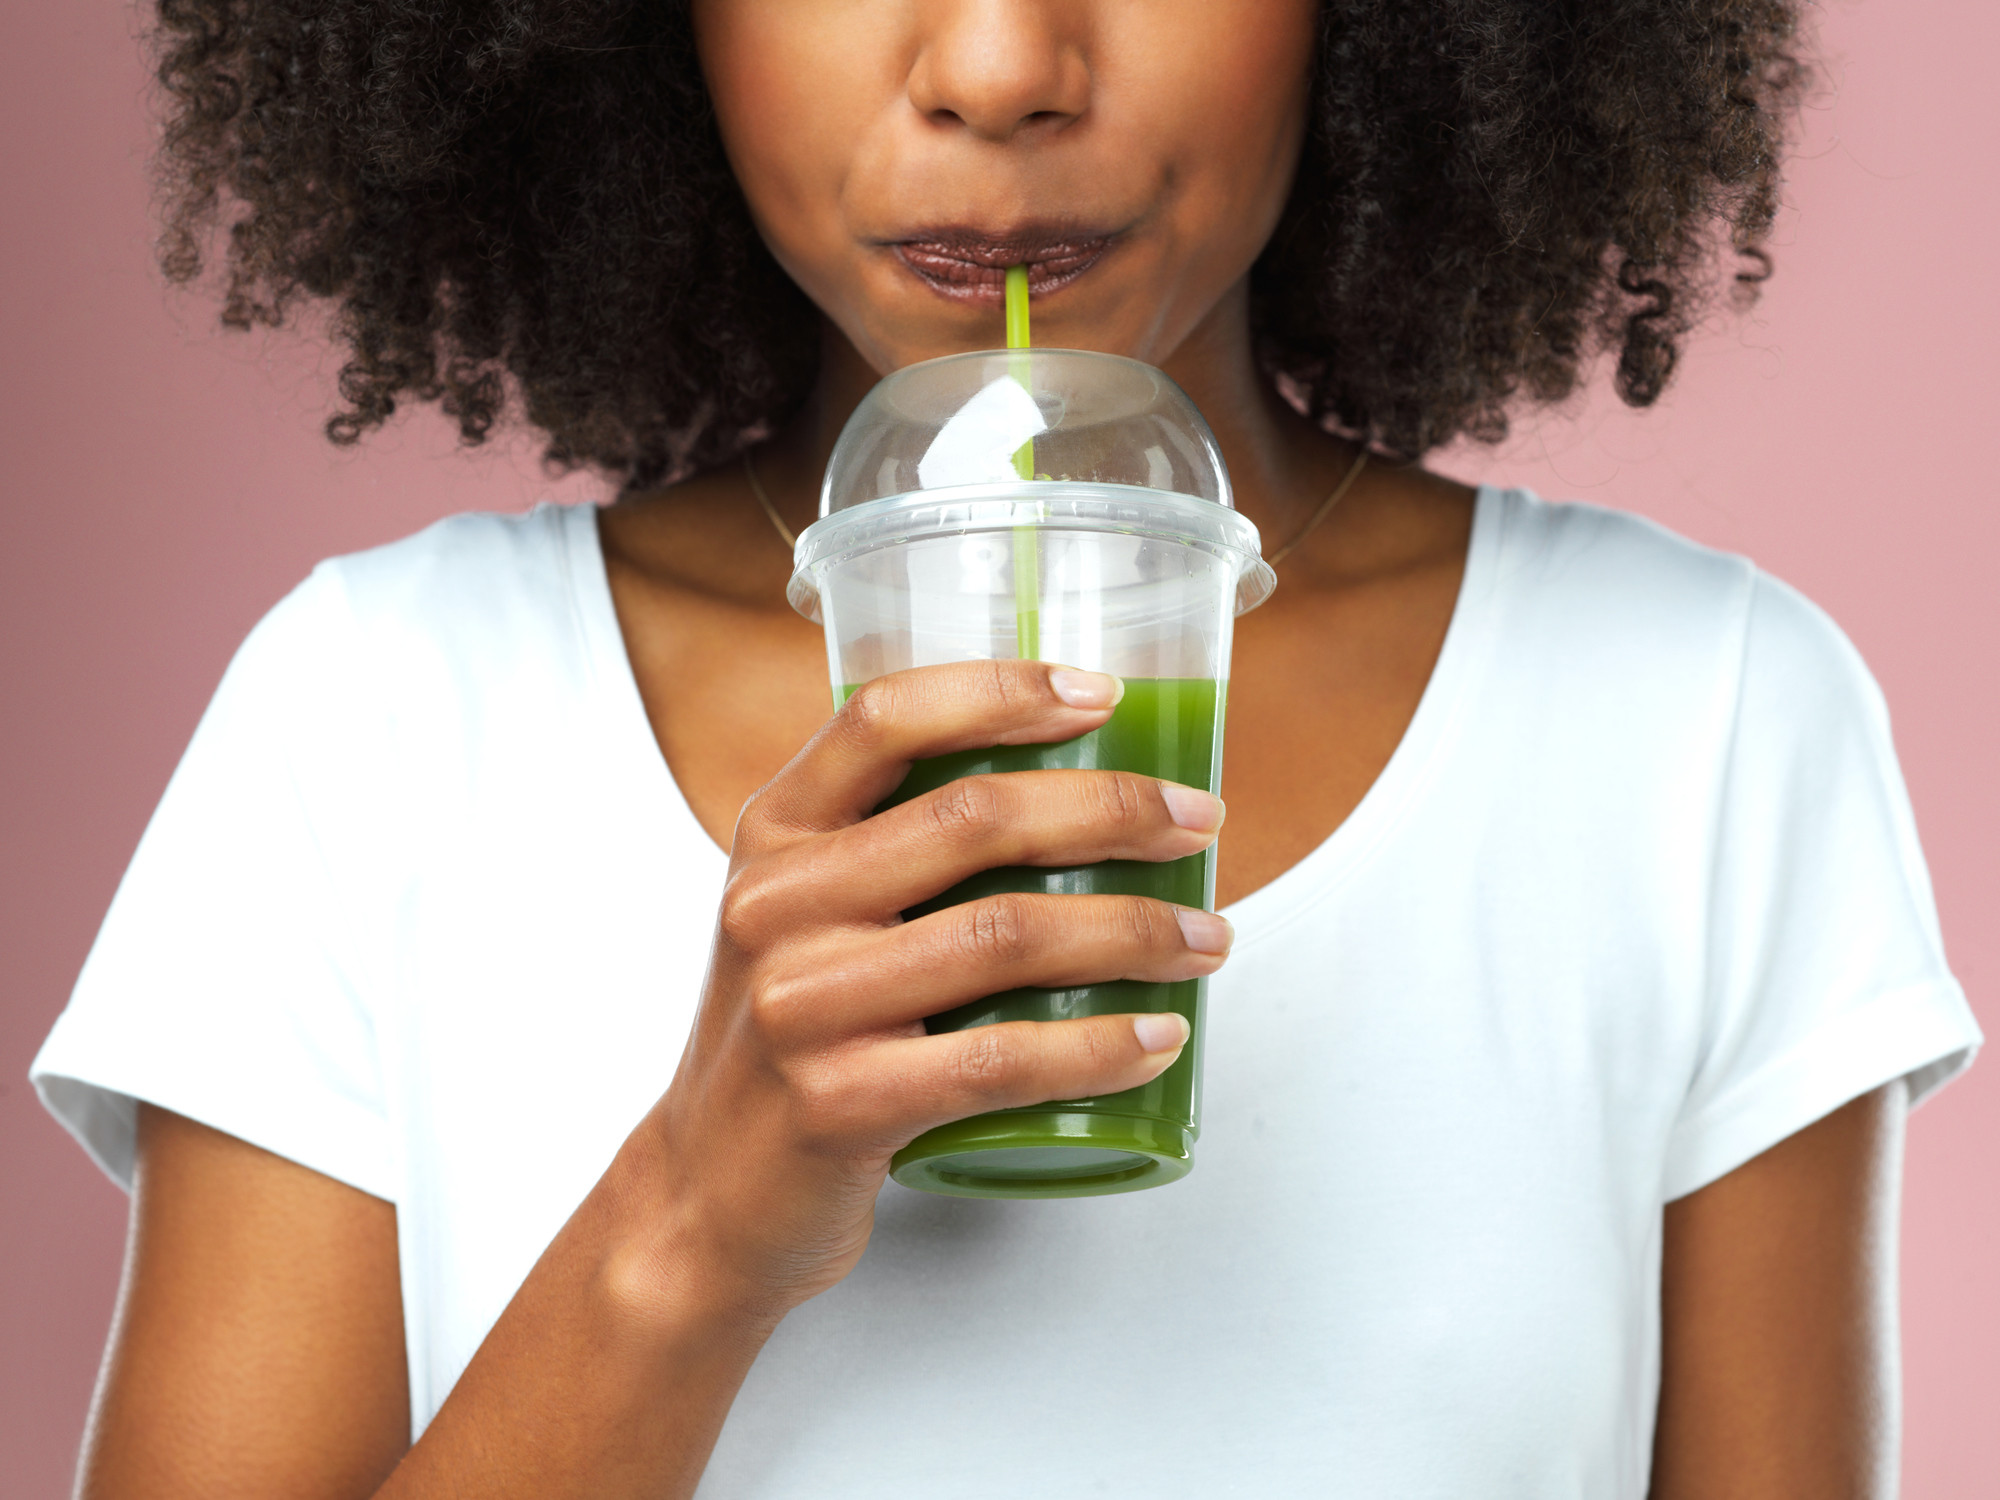 THE SMOOTHIE THAT HELPS GROW YOUR HAIR AND NAILS